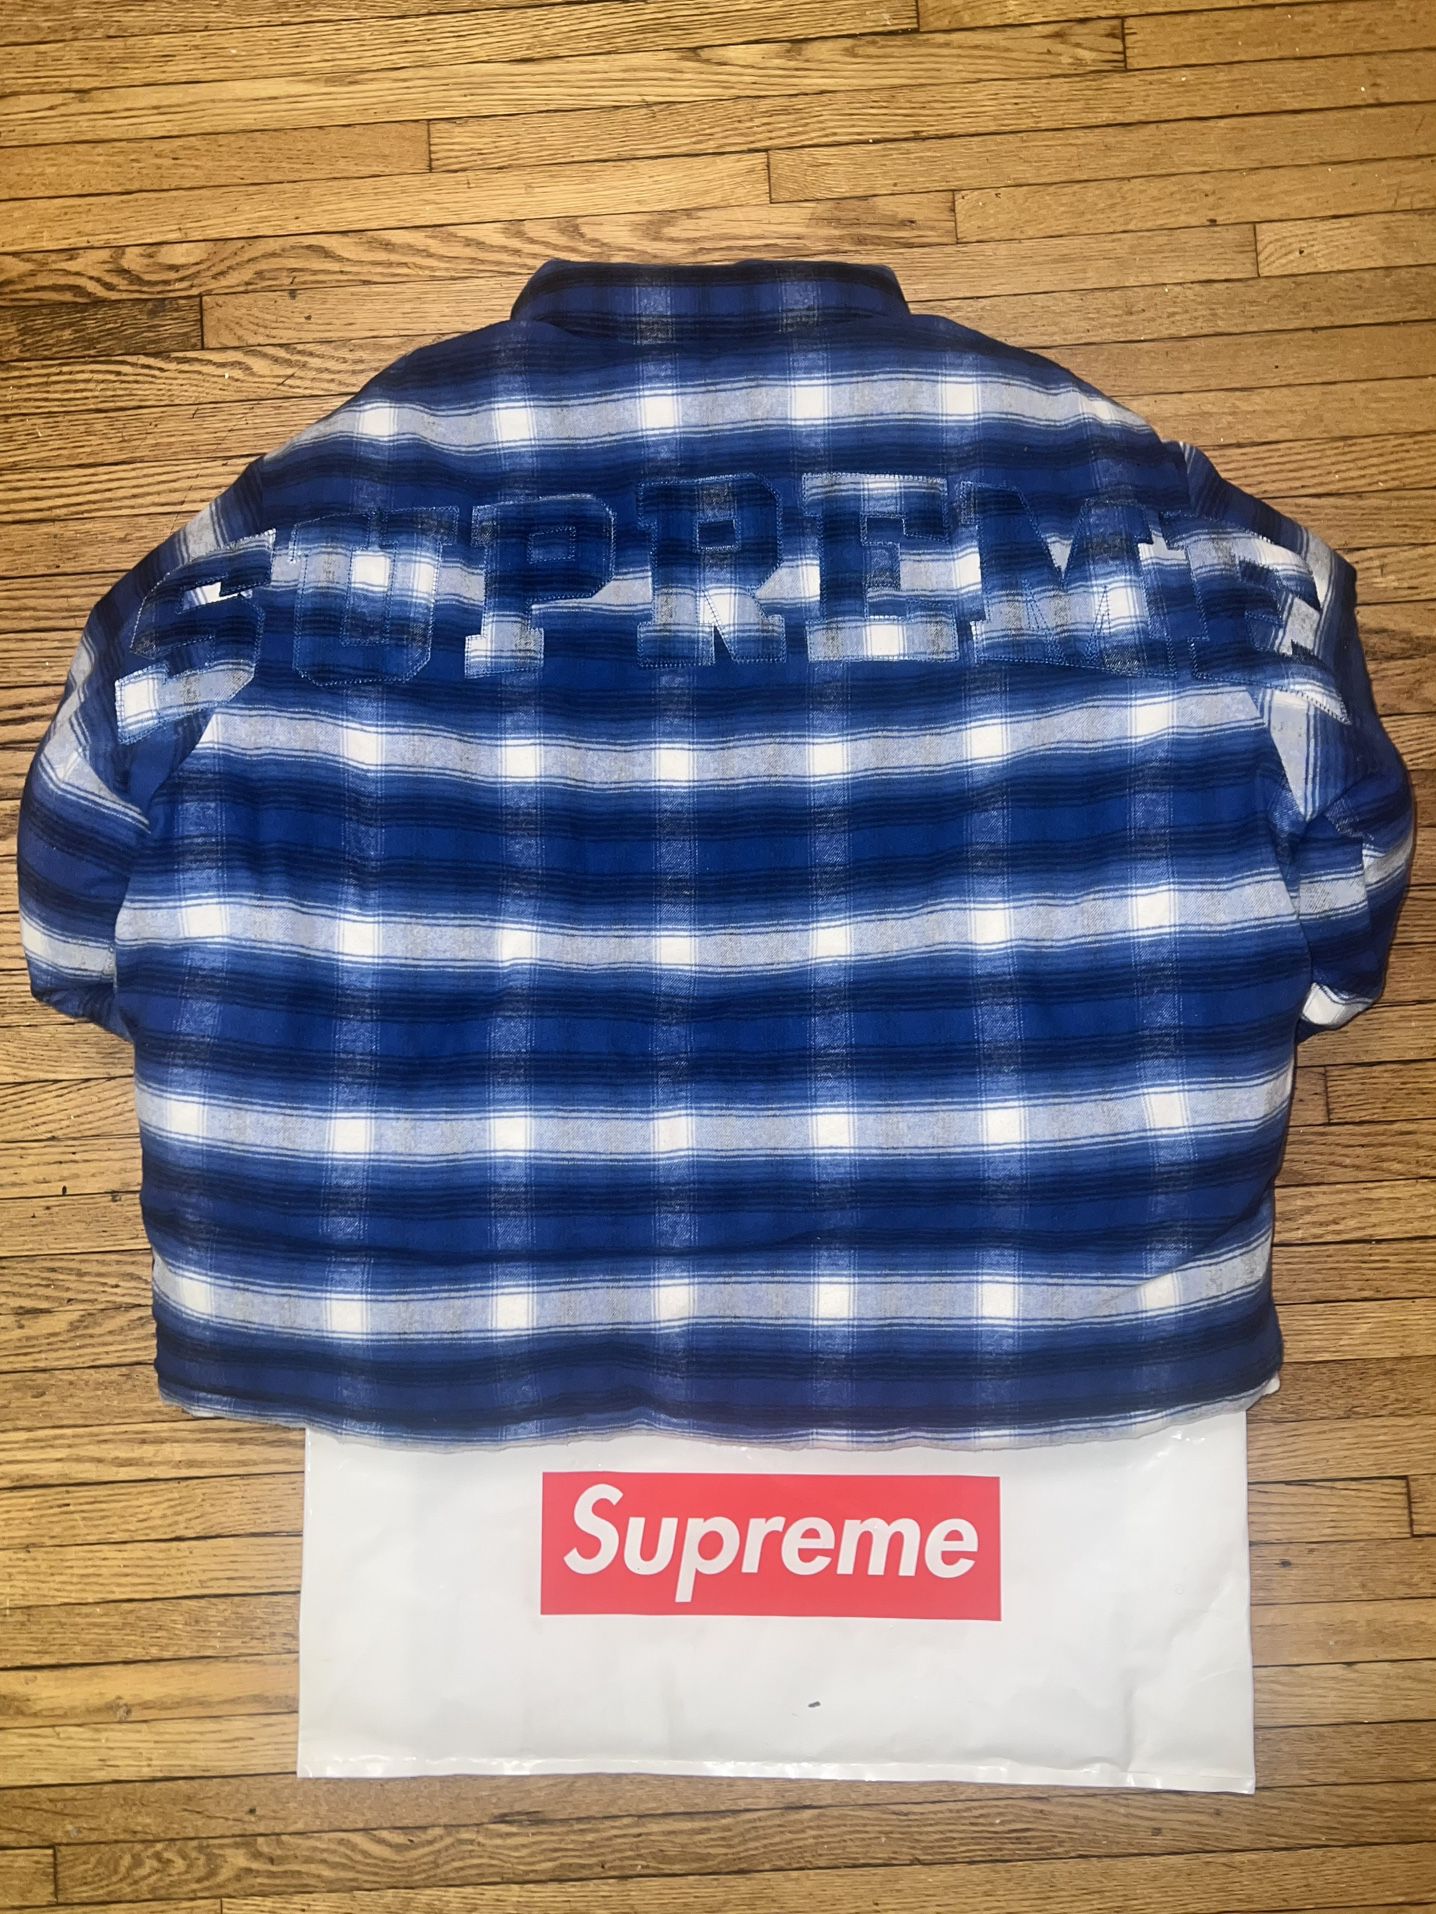 Supreme Jacket Flannel Reversible Puffer XXL for Sale in Brooklyn